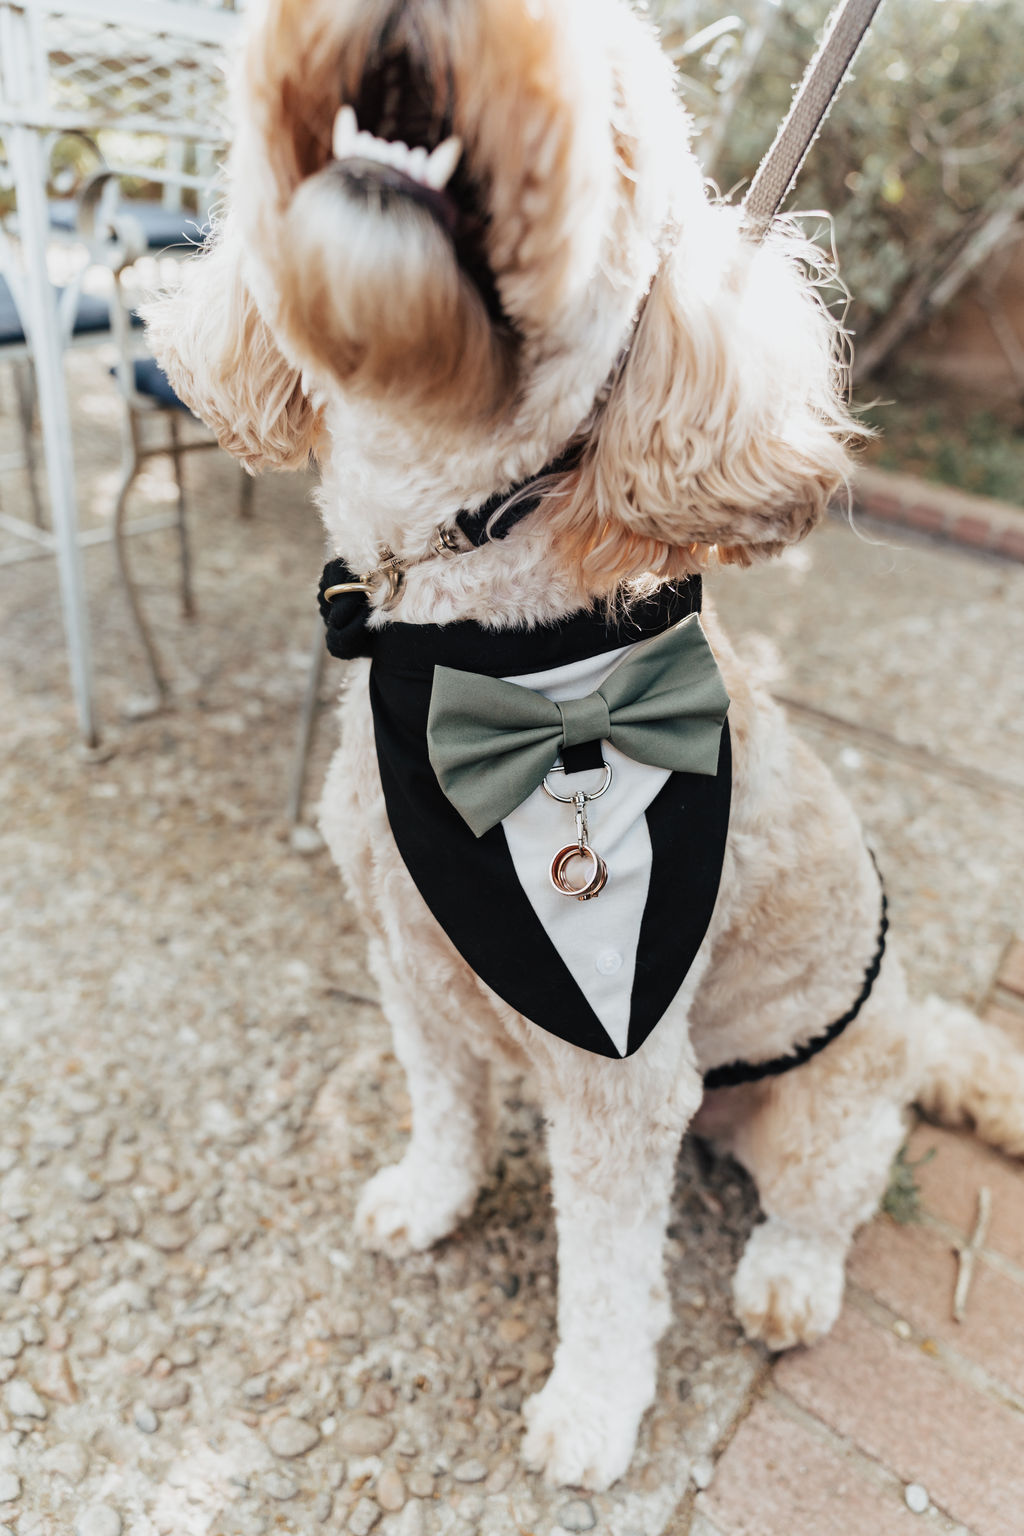 Australian Cobberdog in tux vest with green bowtie and copper ring around neck.